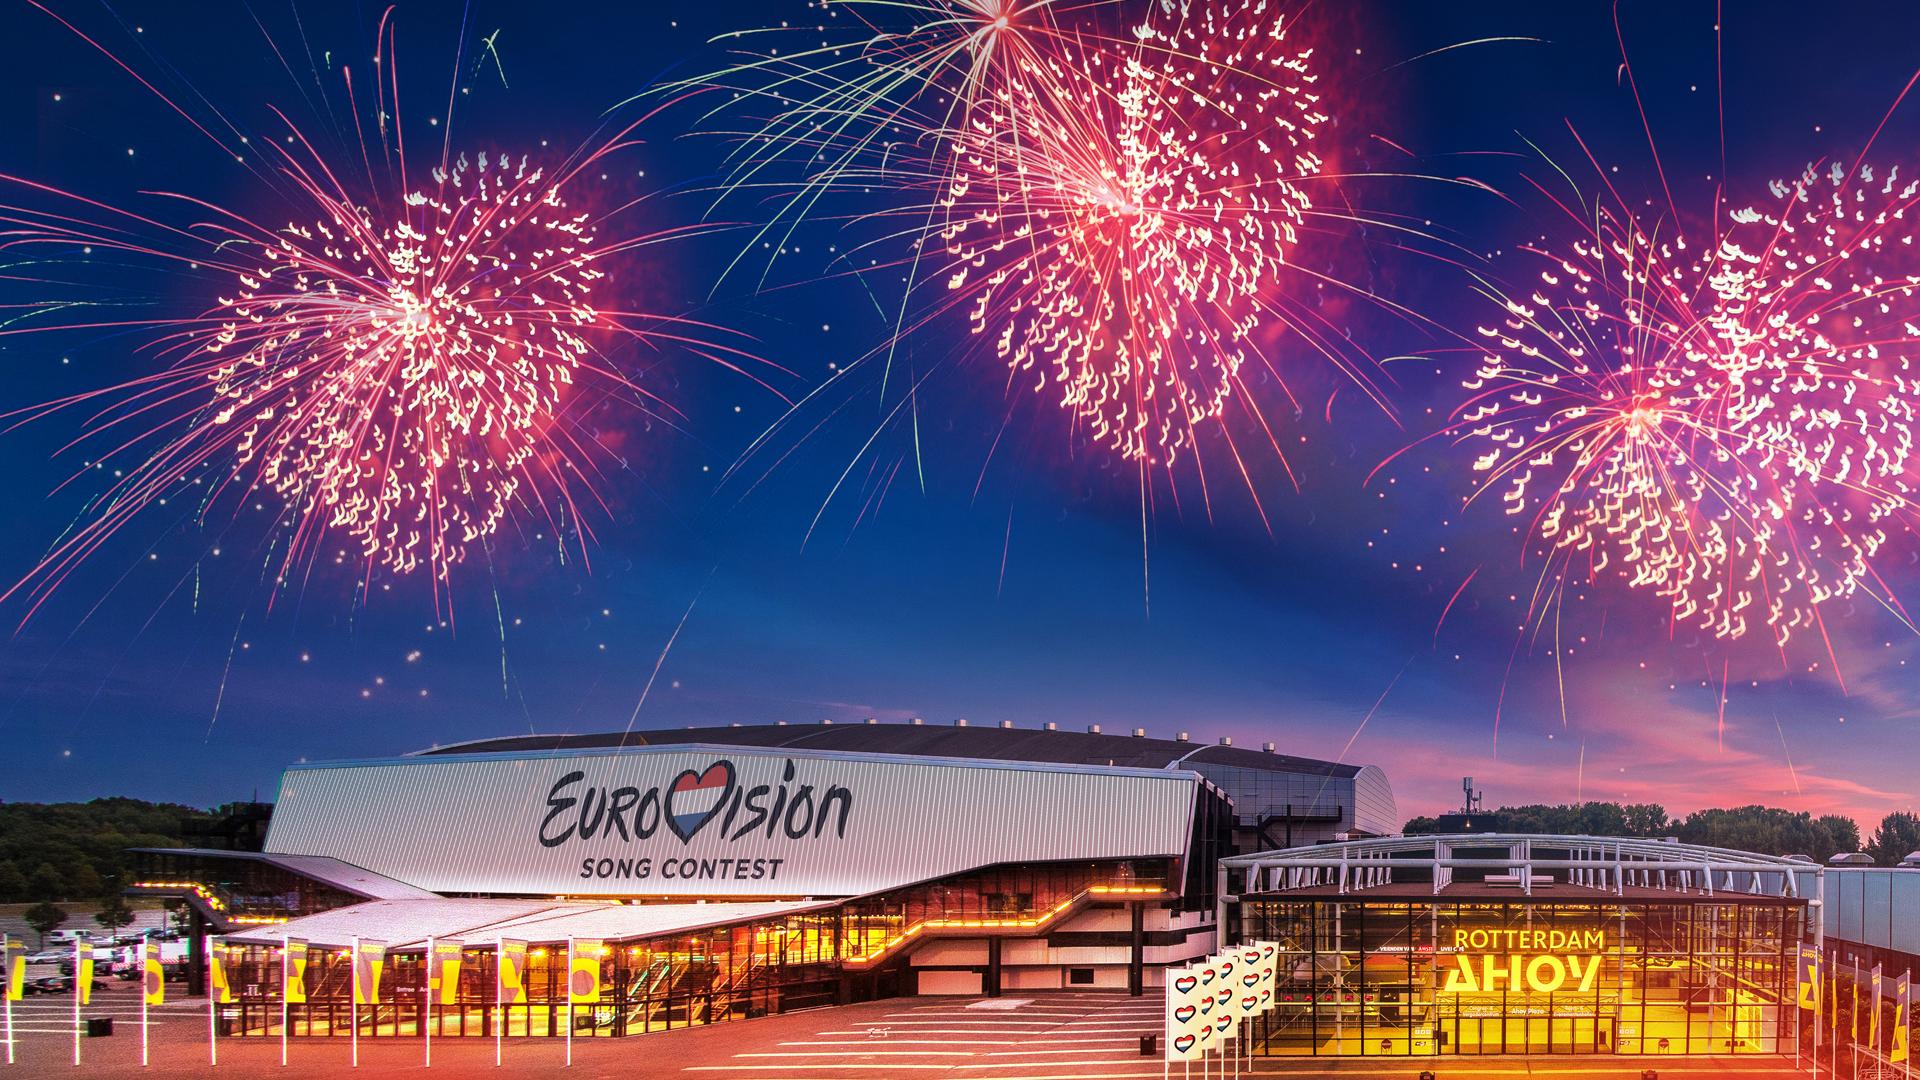 These are the Rotterdam hotel prices during Eurovision Songcontest 2020